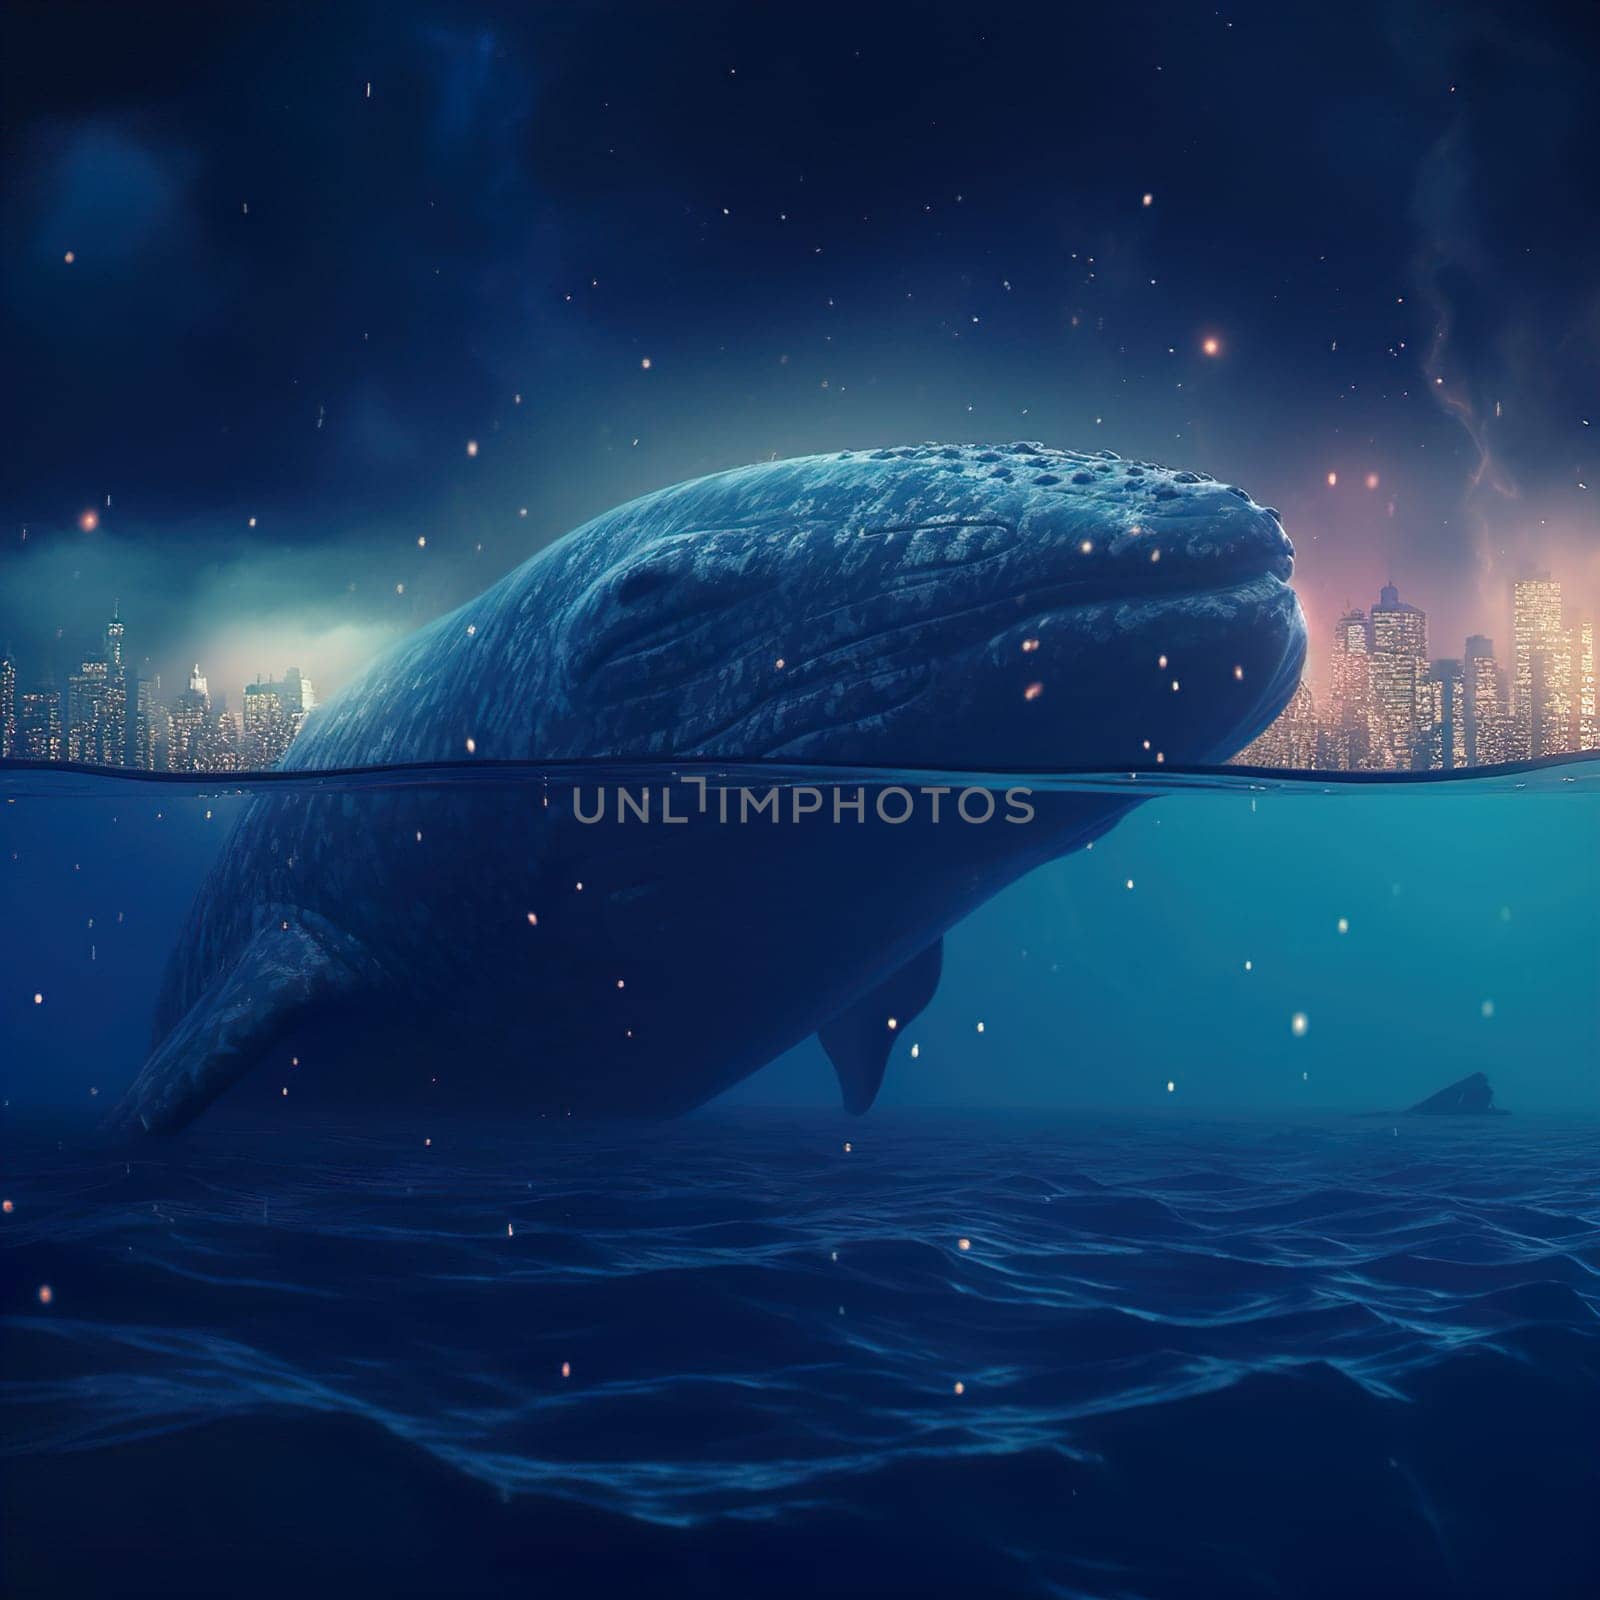 Beautiful whale underwater by banate